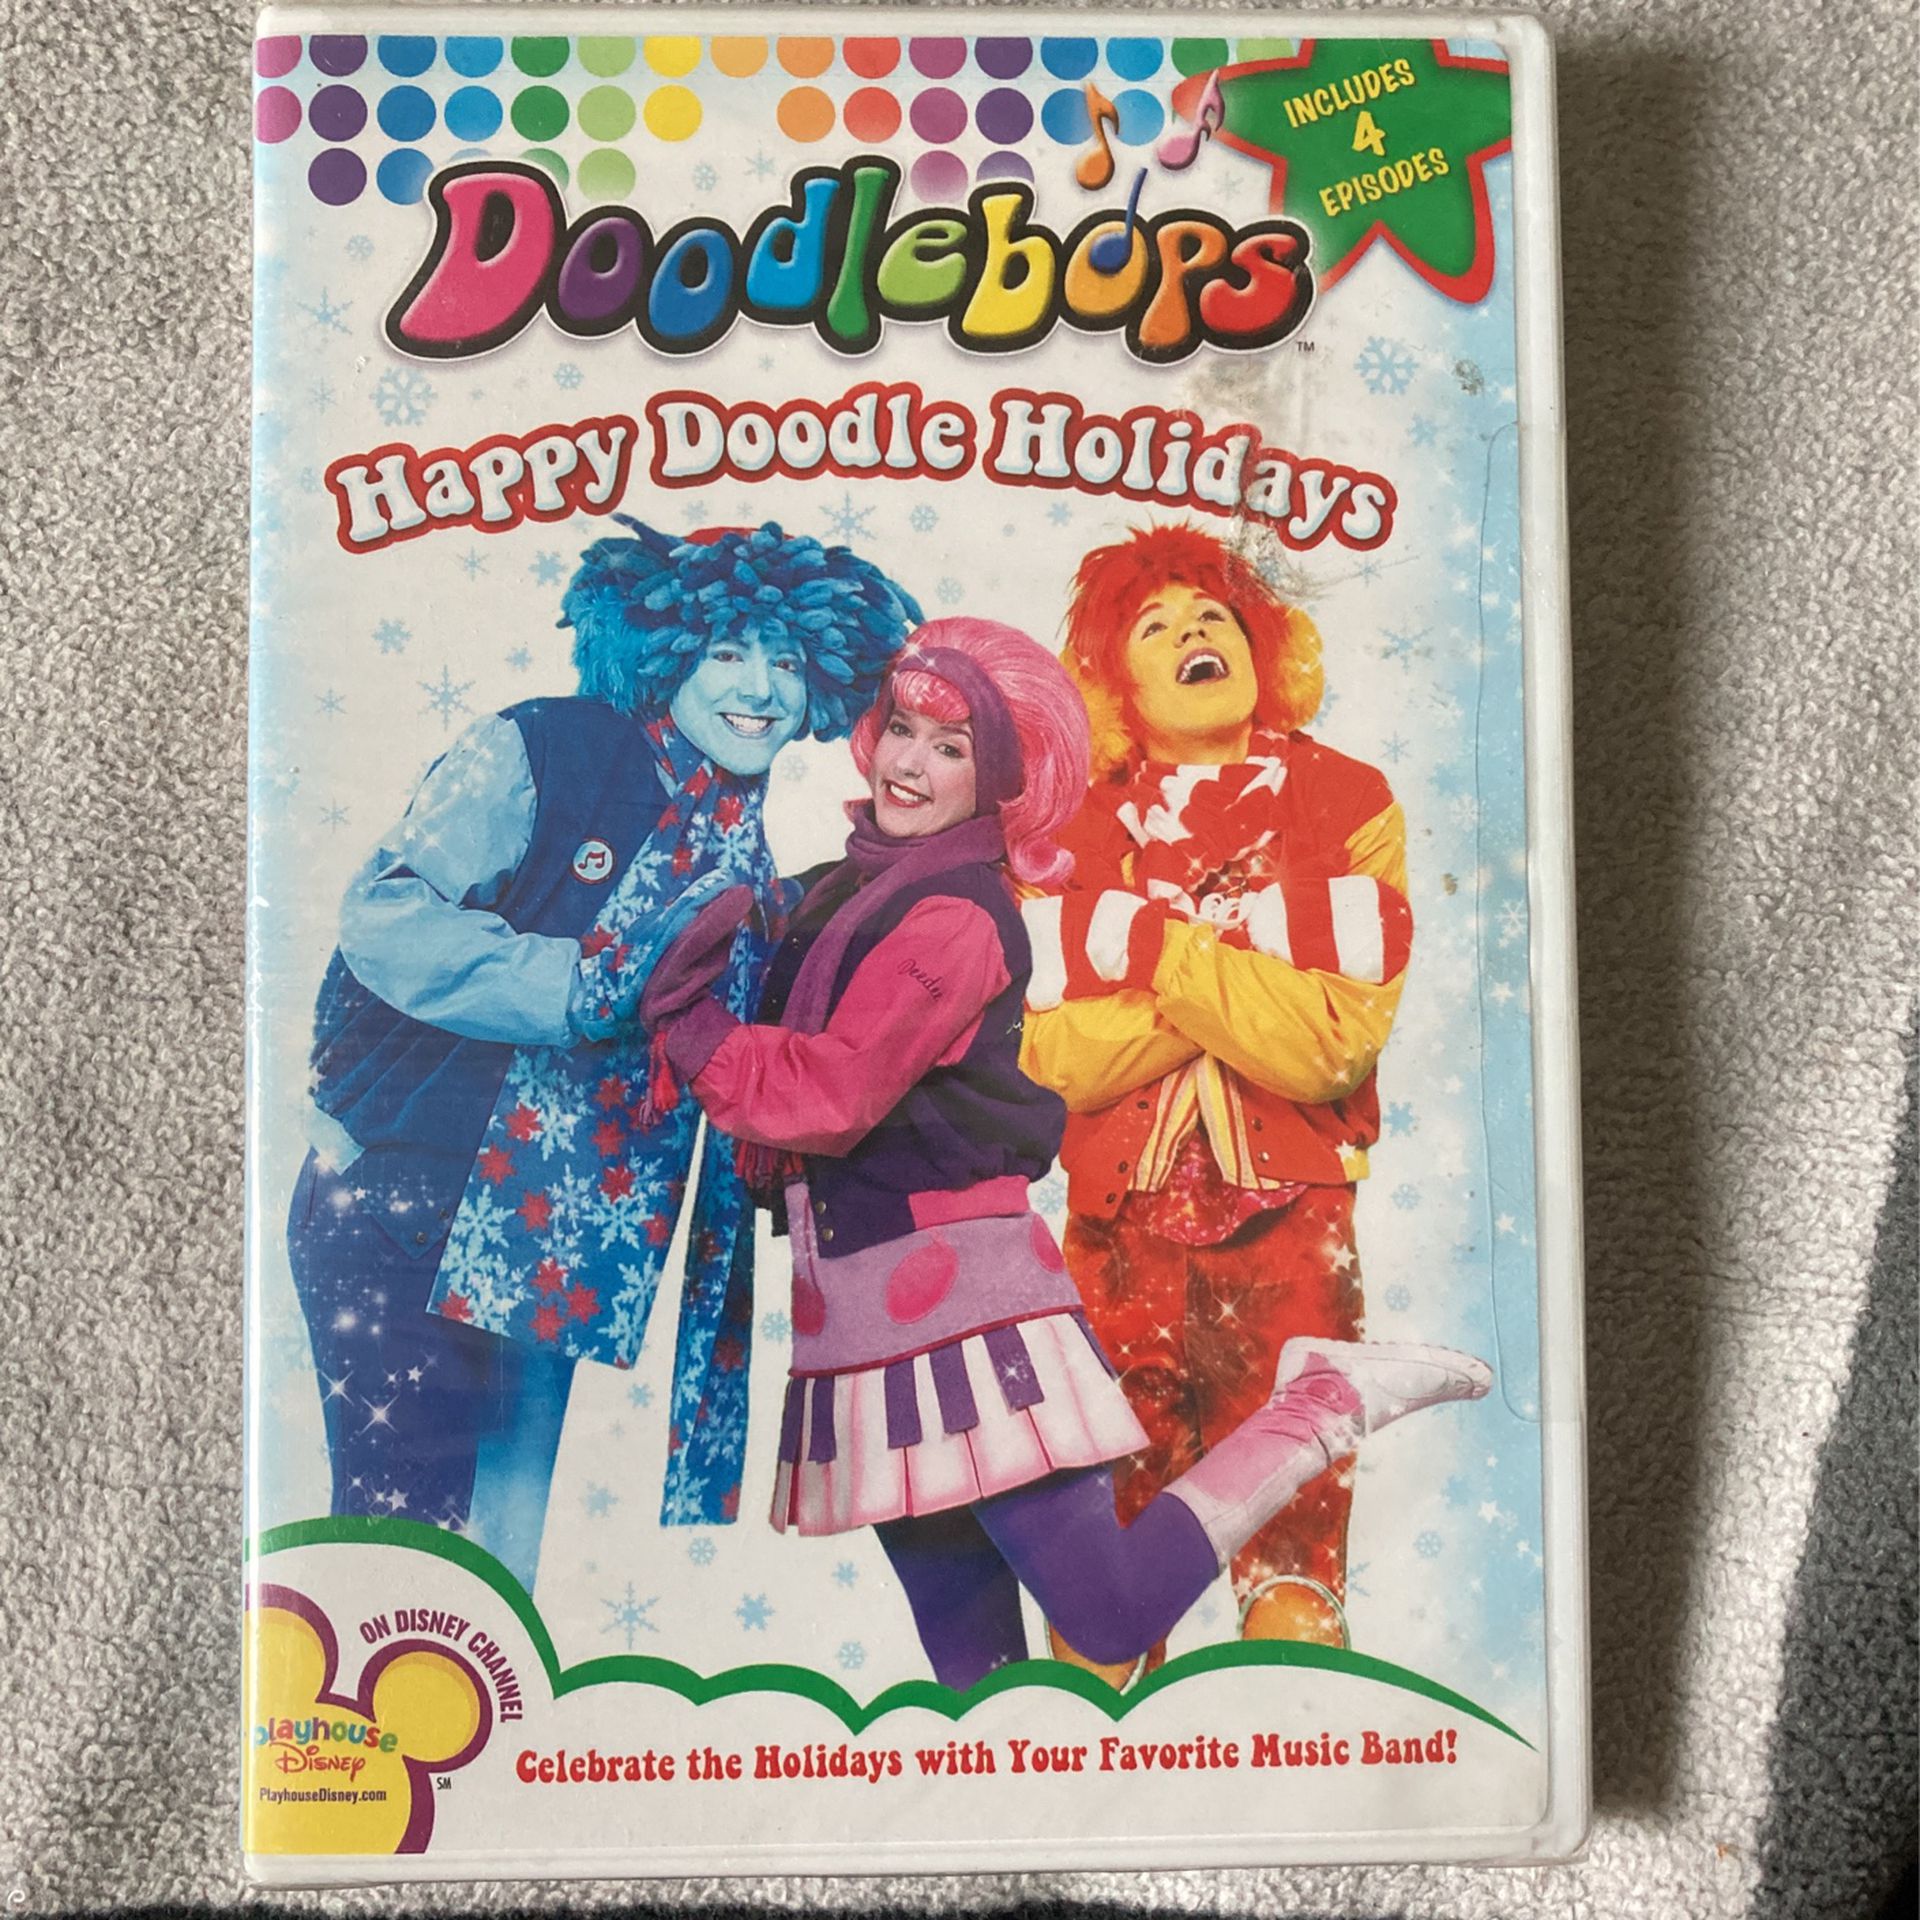 Doodlebops Happy Doodle Holidays Christmas DVD NEW